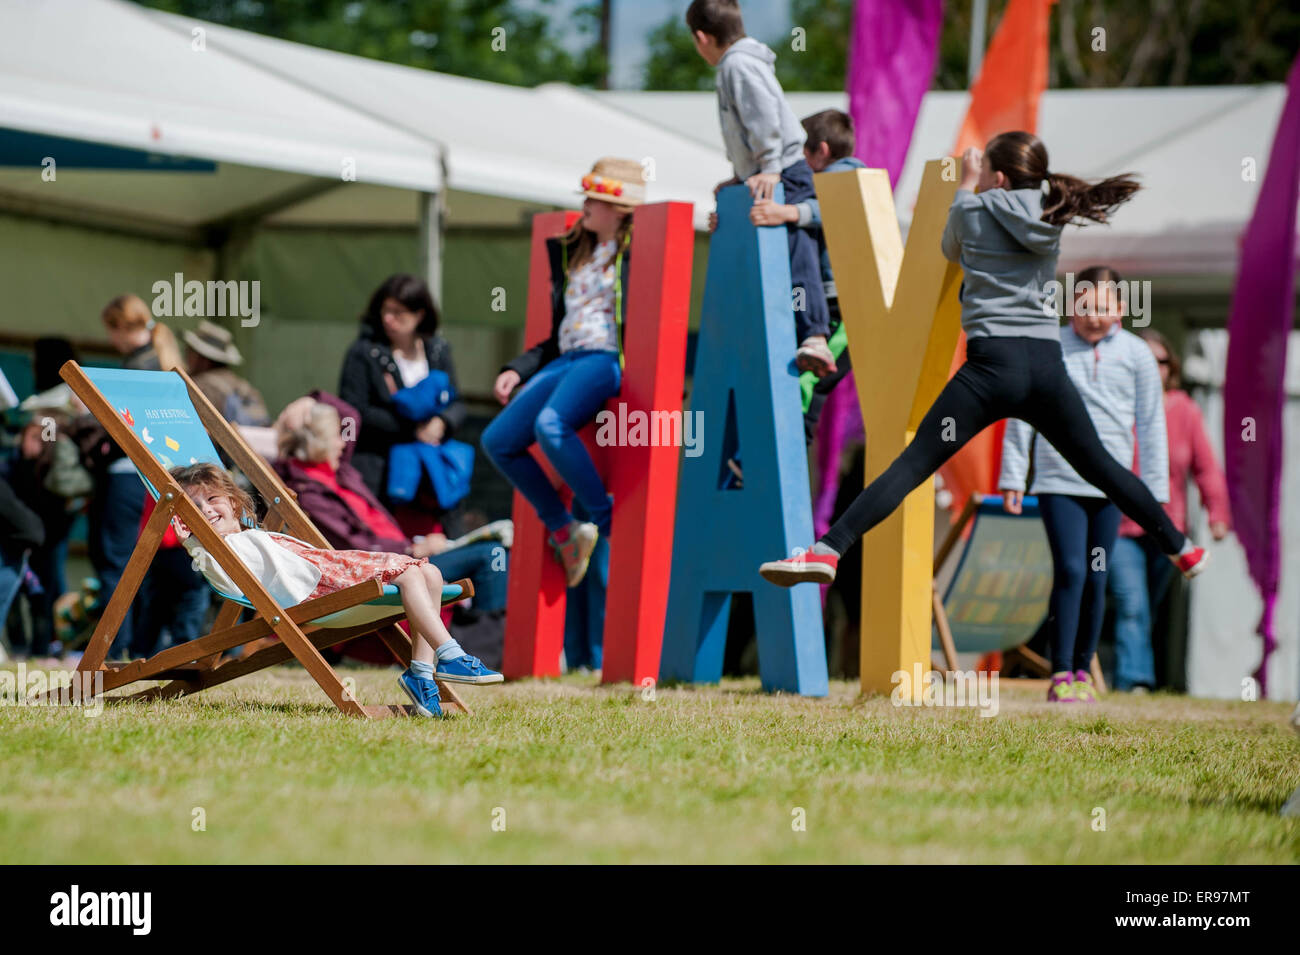 Hay on Wye, UK. Thursday 28 May 2015  Pictured: Young children enjoying the sunshine at Hay Re: The 2015 Hay Festival takes place in Hay on Wye, Powys, Wales Stock Photo